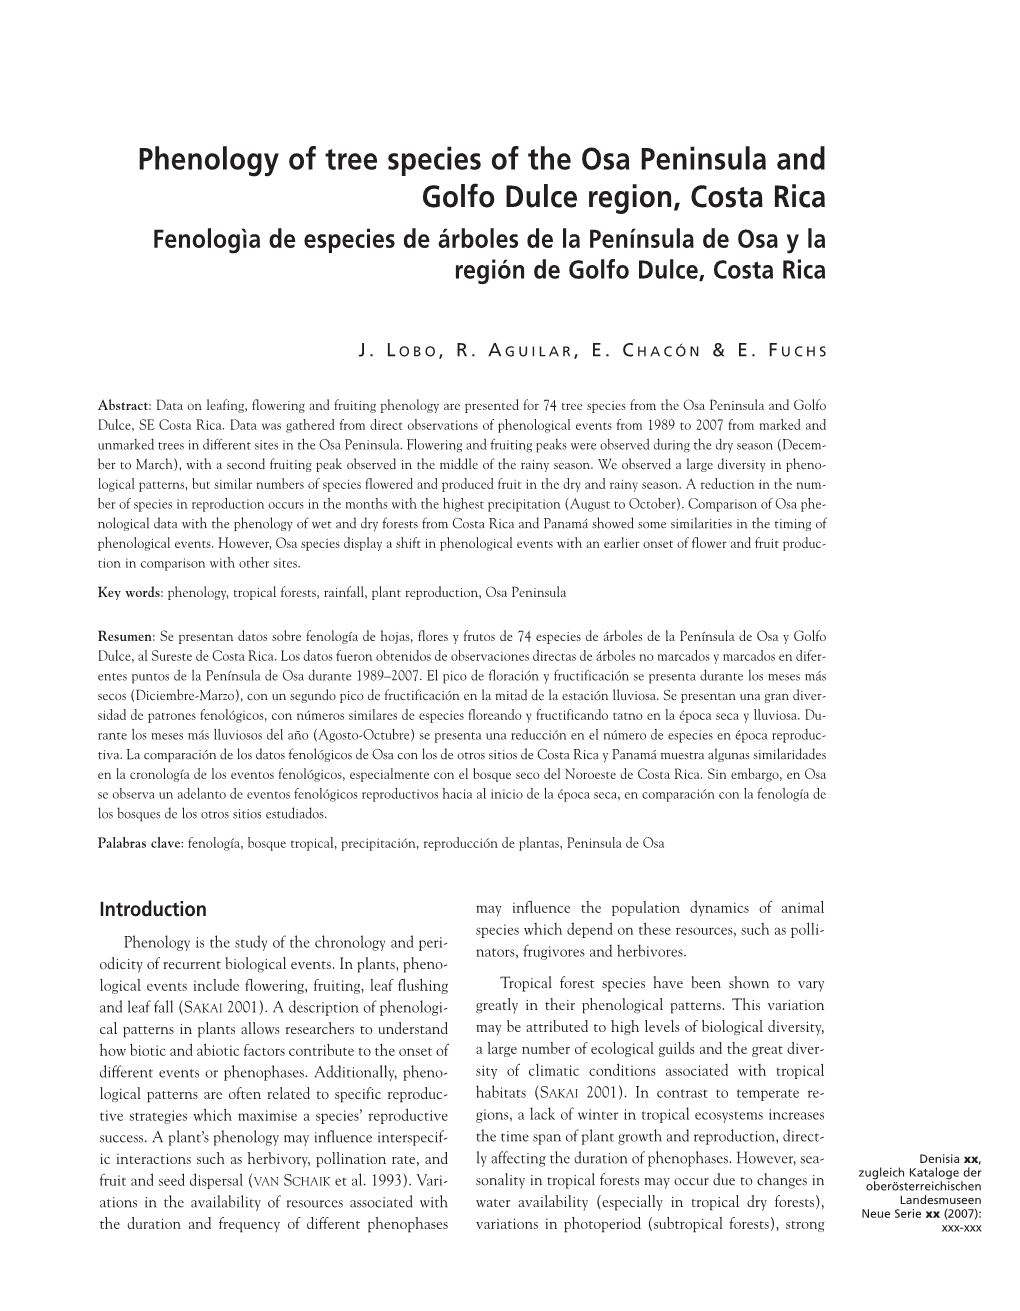 Phenology of Tree Species of the Osa